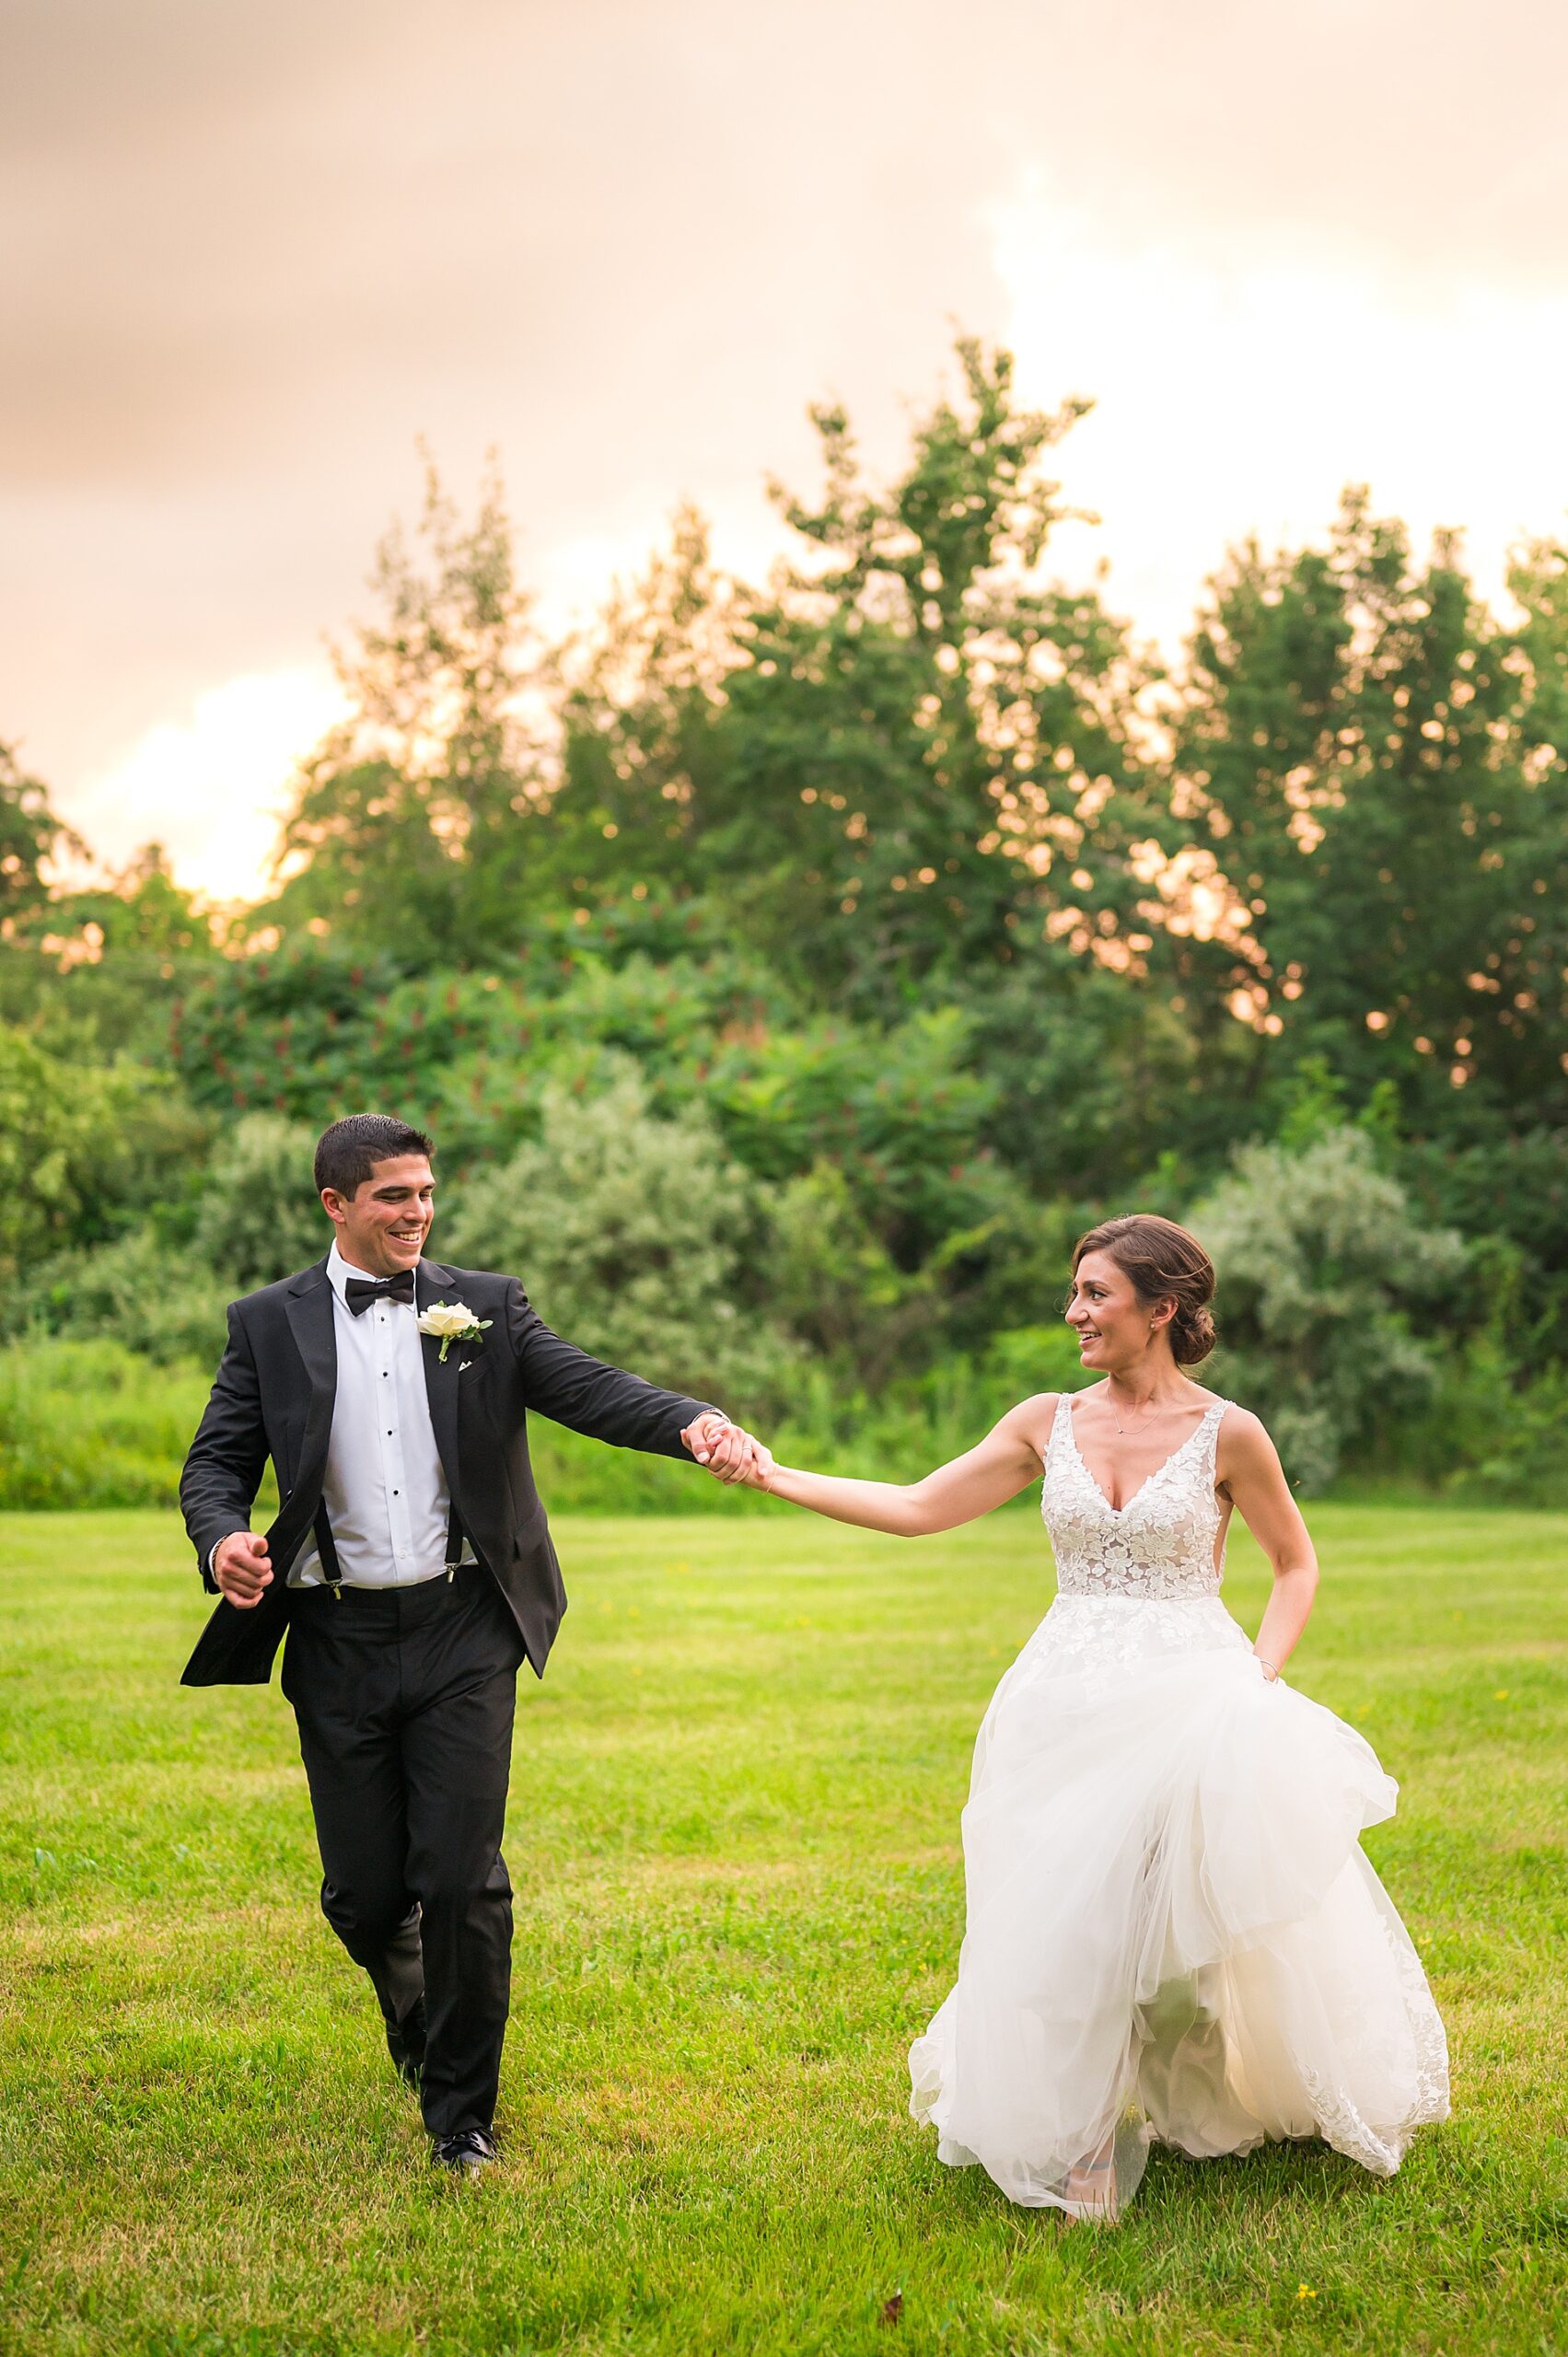 golden hour wedding portaits from Summer Wedding at Granite Rose by Wedgewood Weddings